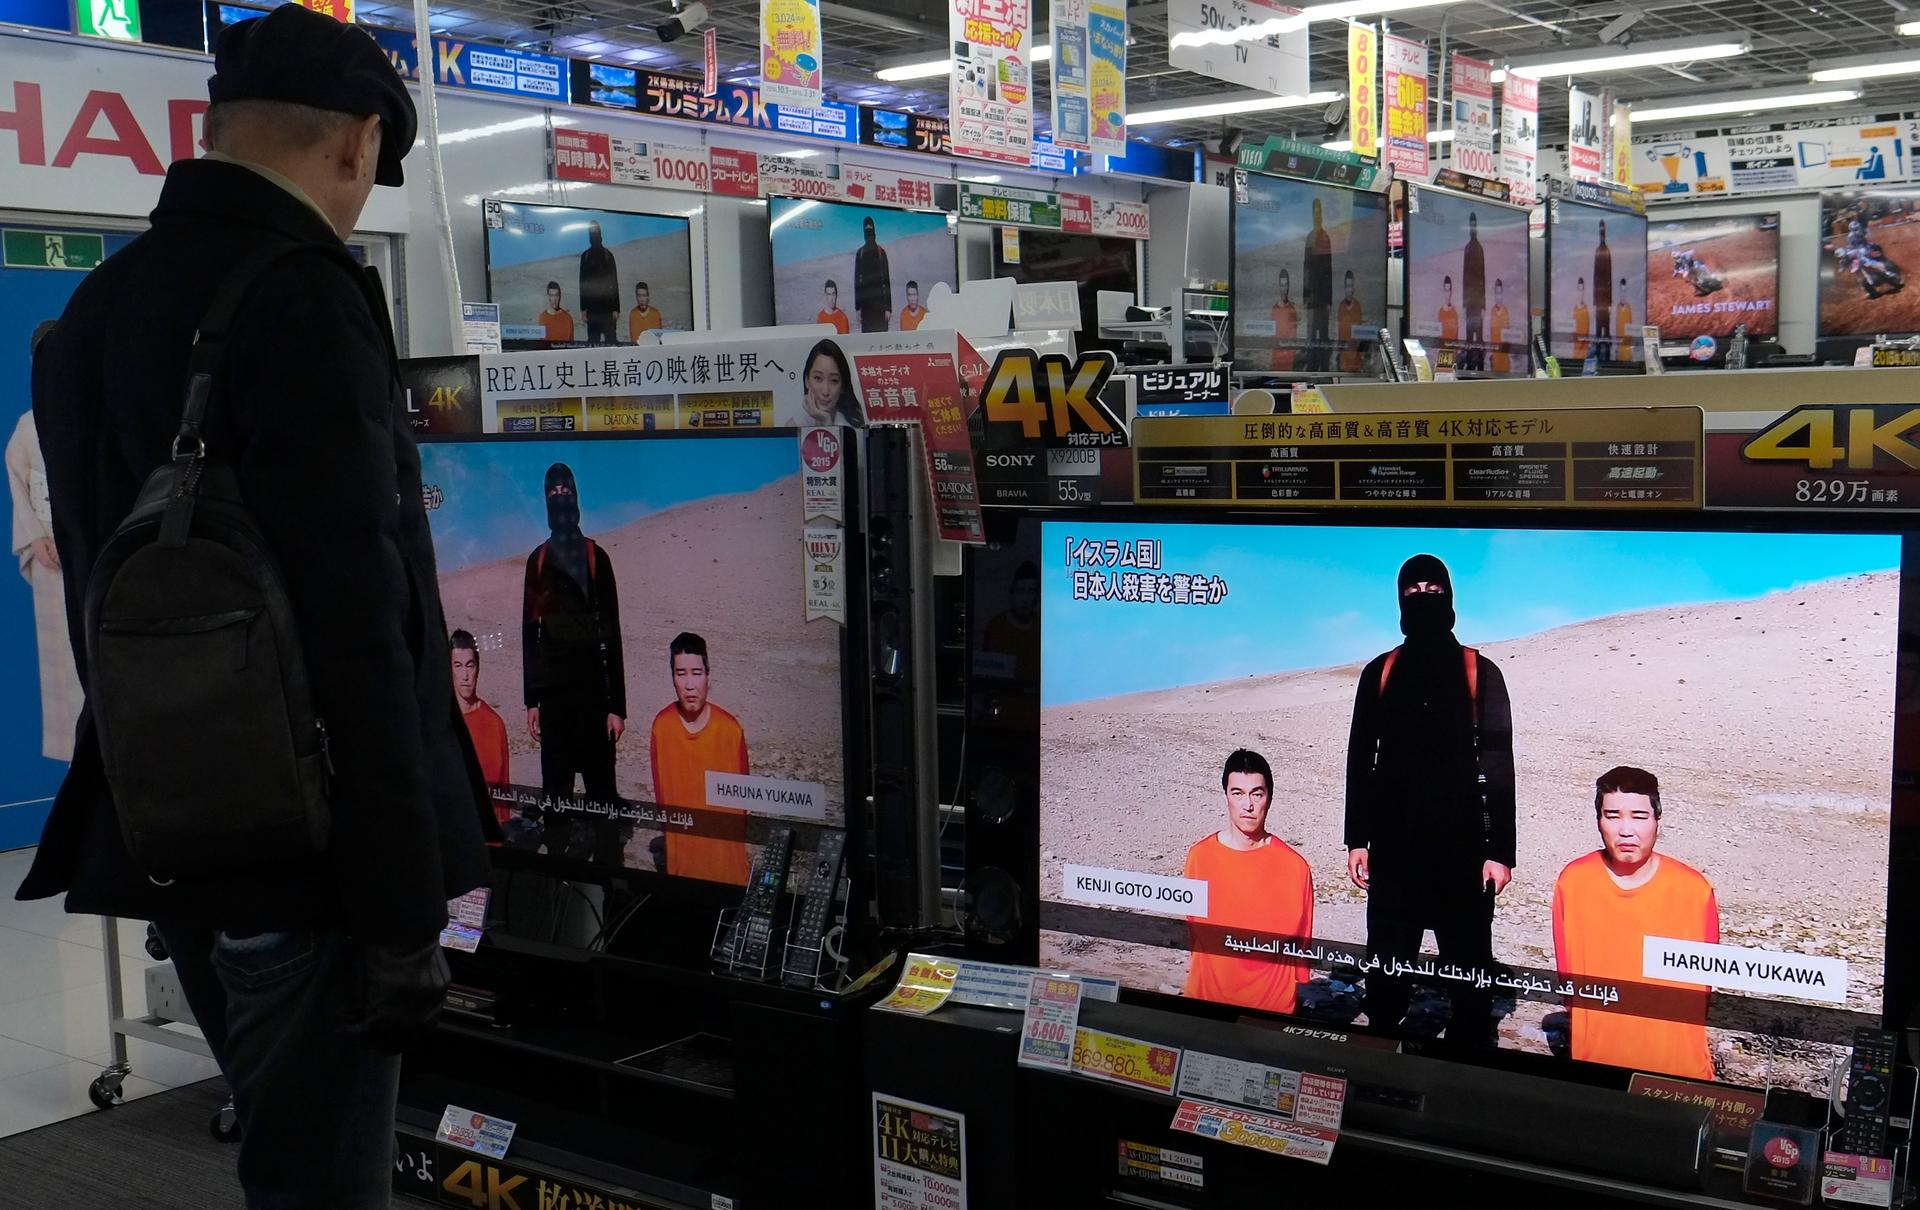 A man in Tokyo electronics store watches a news program about an ISIS video purporting to show two Japanese captives on January 20, 2015.